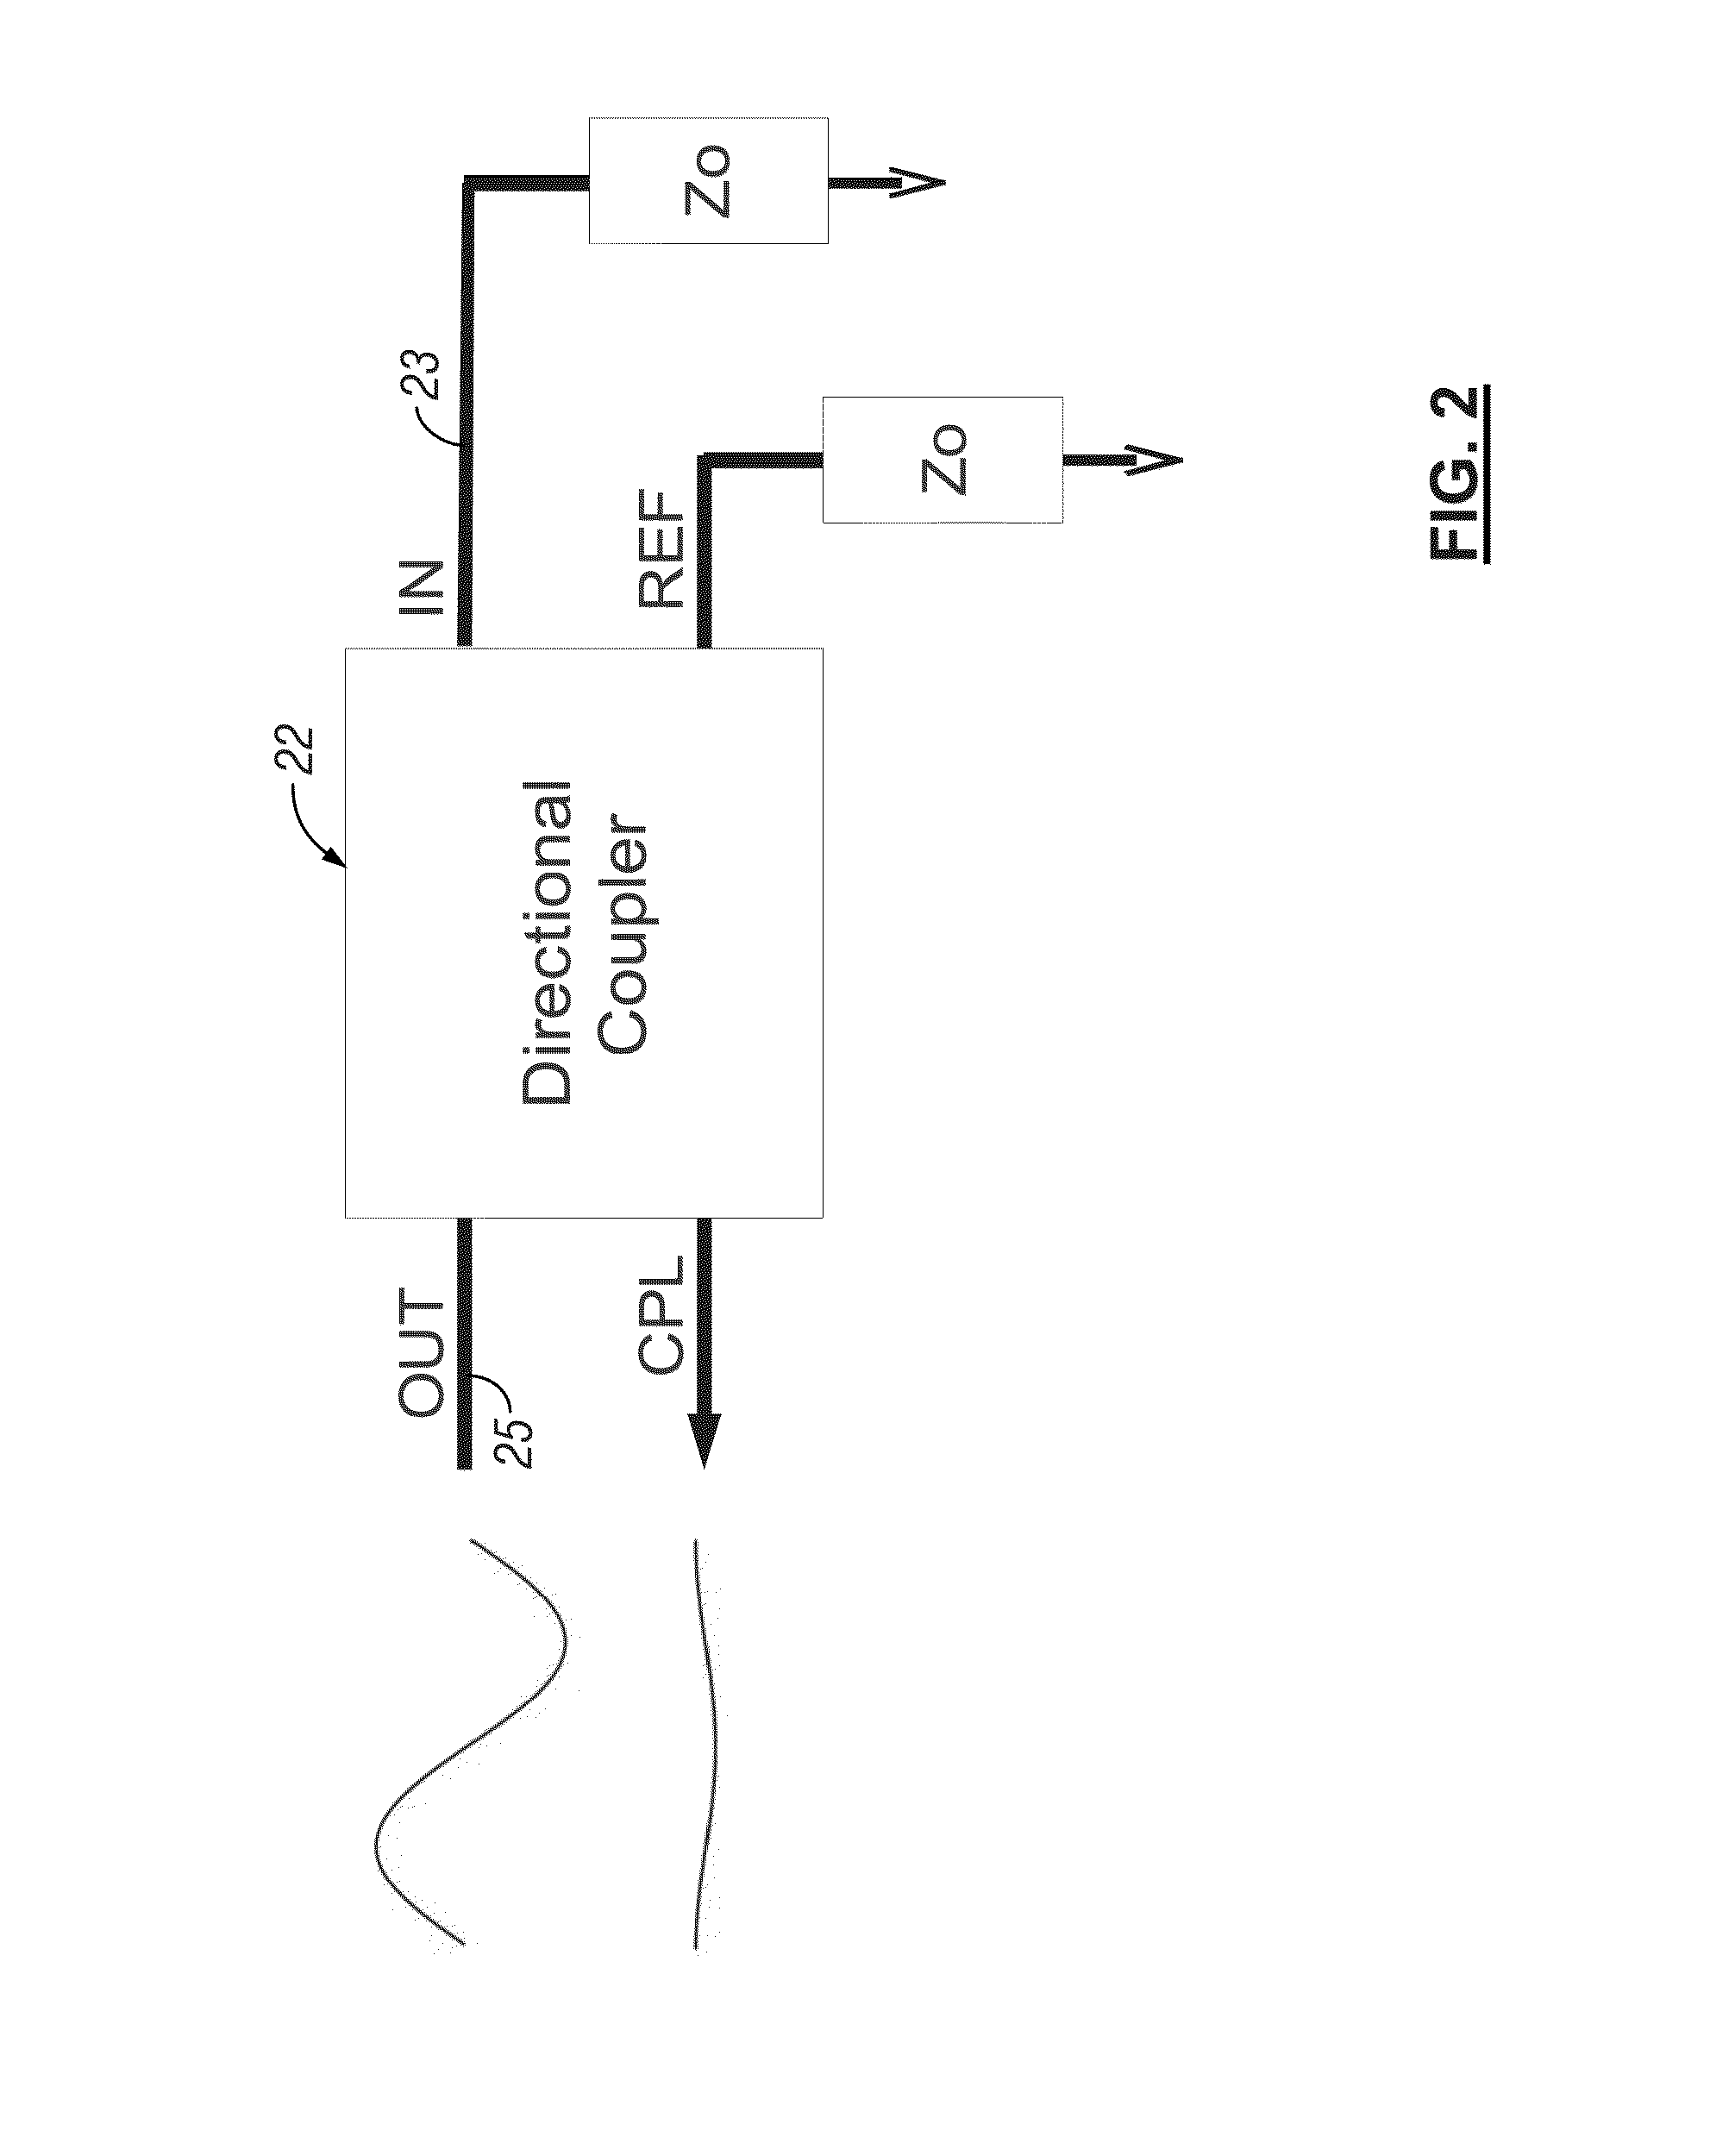 Power line device with directional coupler